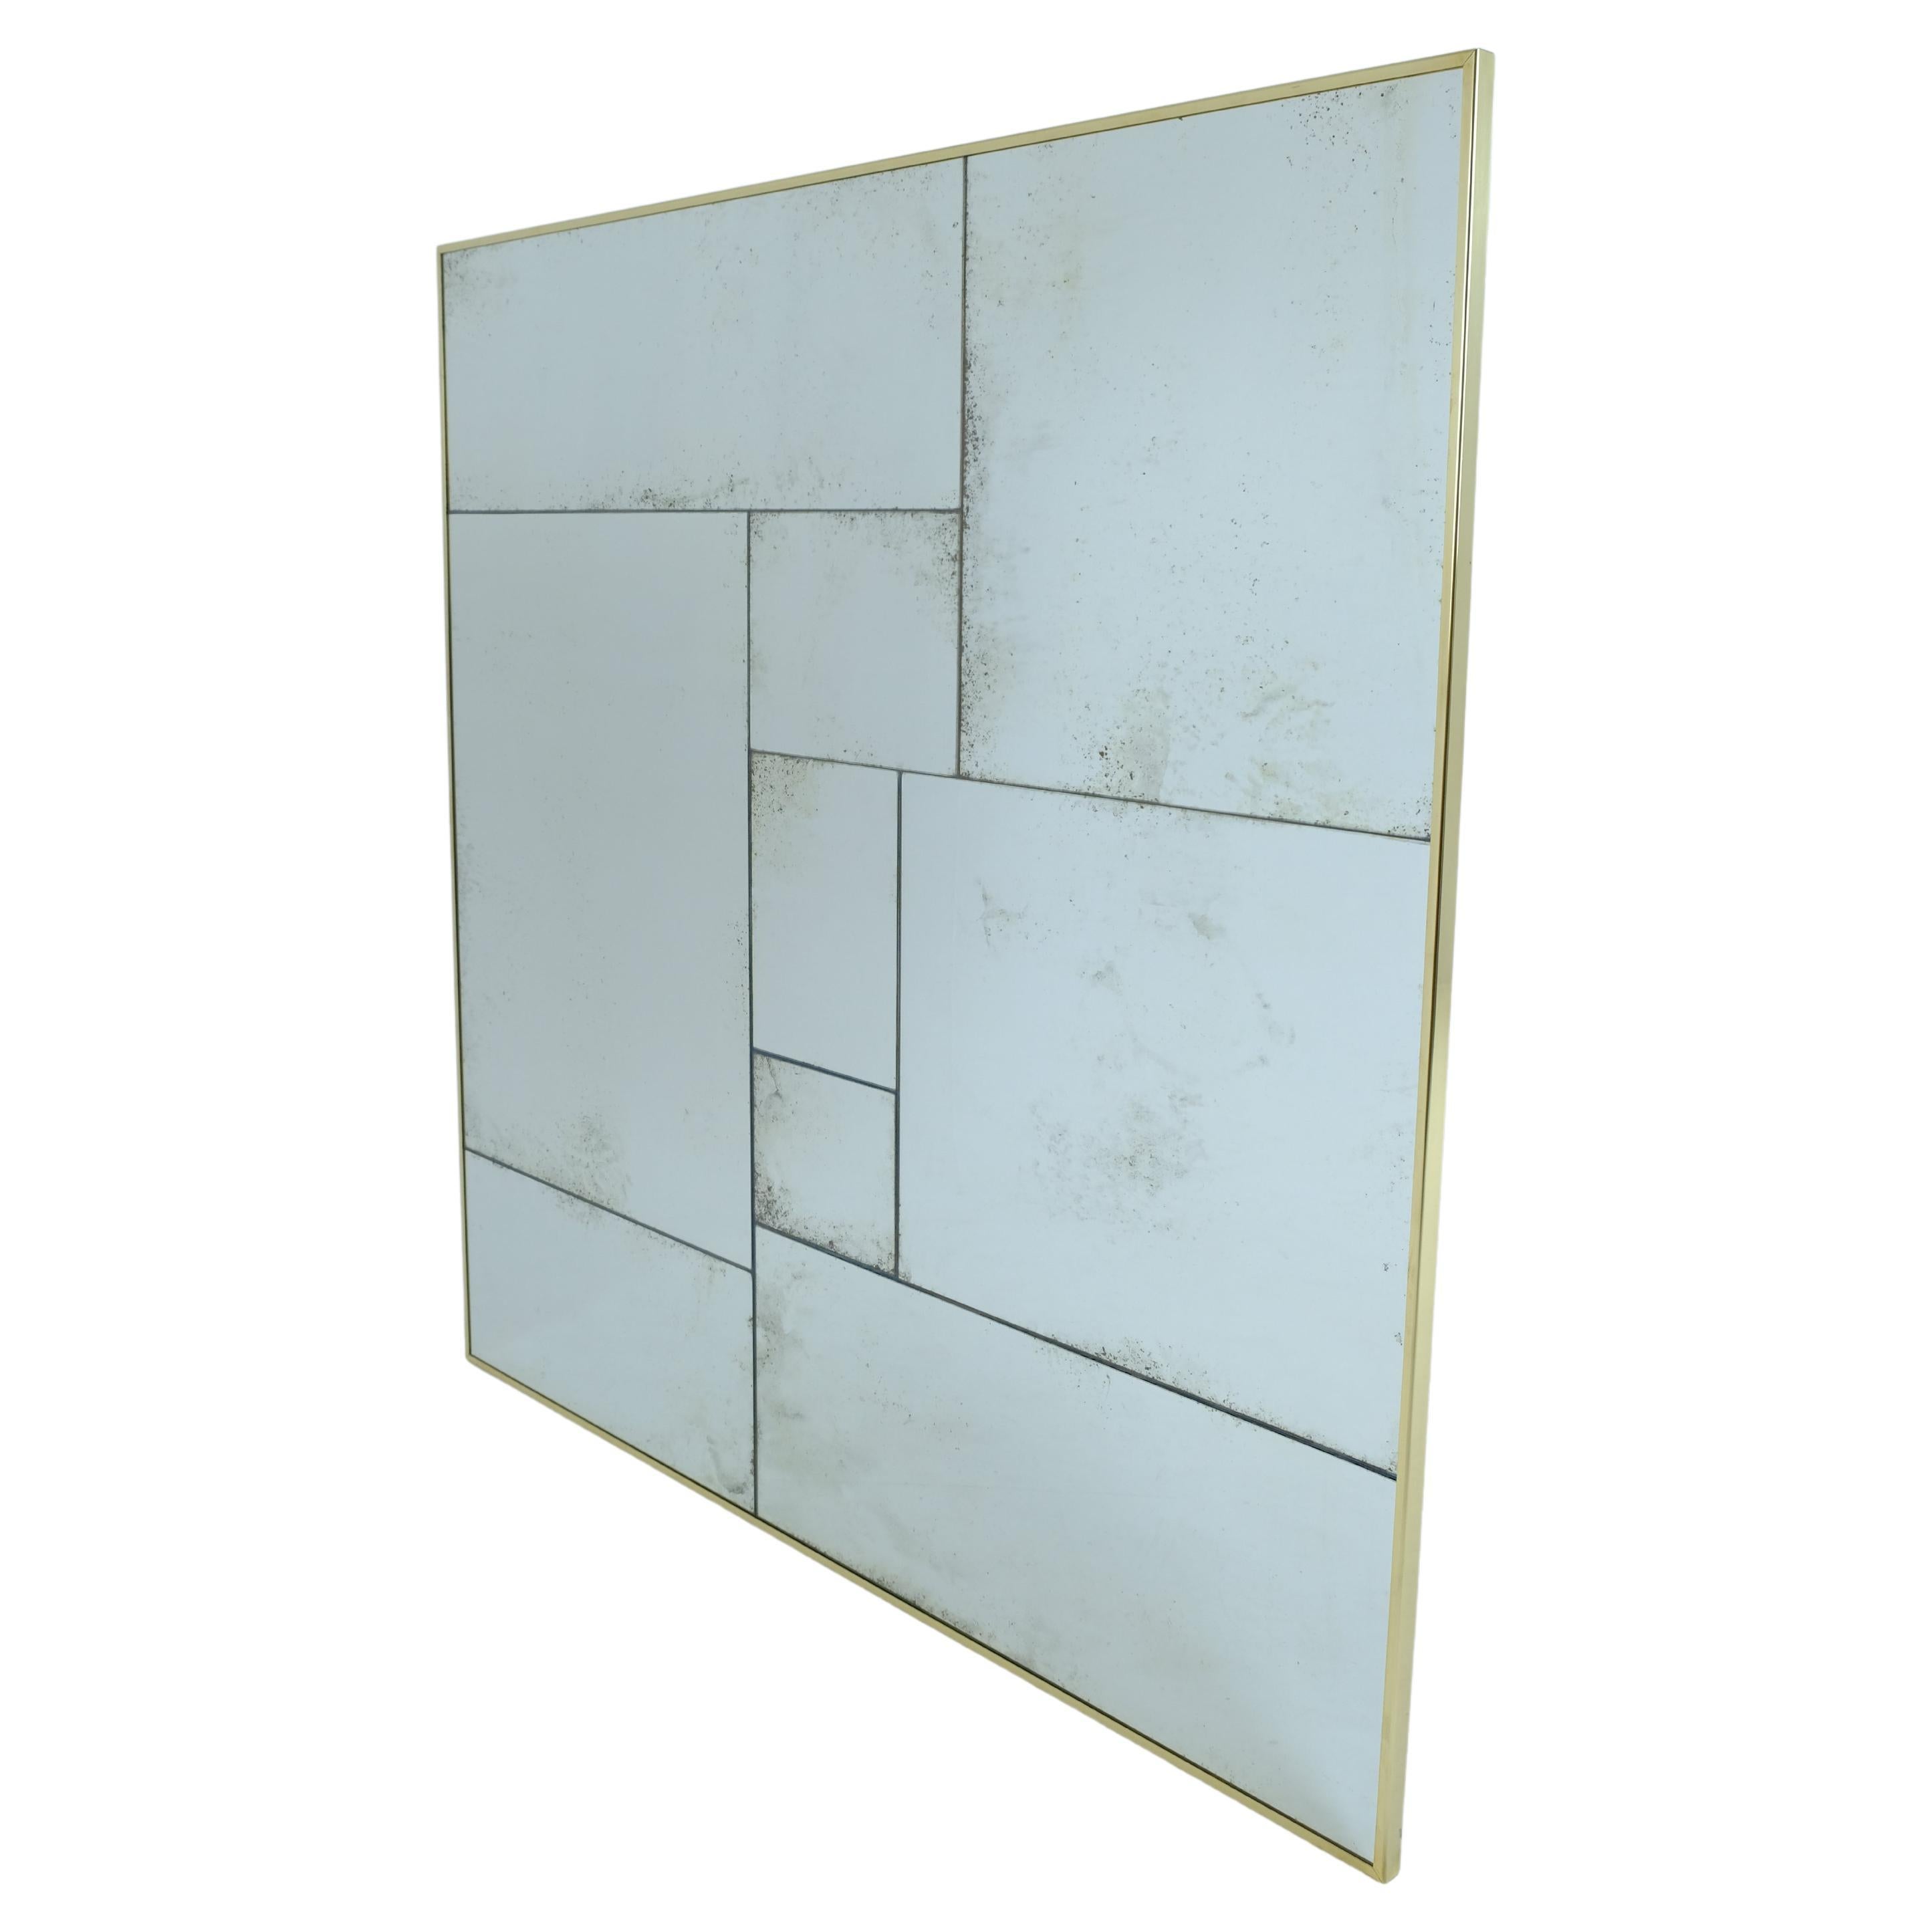 Industrial Custom-Made Artisanal Mirror Hand-Aged Authentic Brass Finish Frame M For Sale